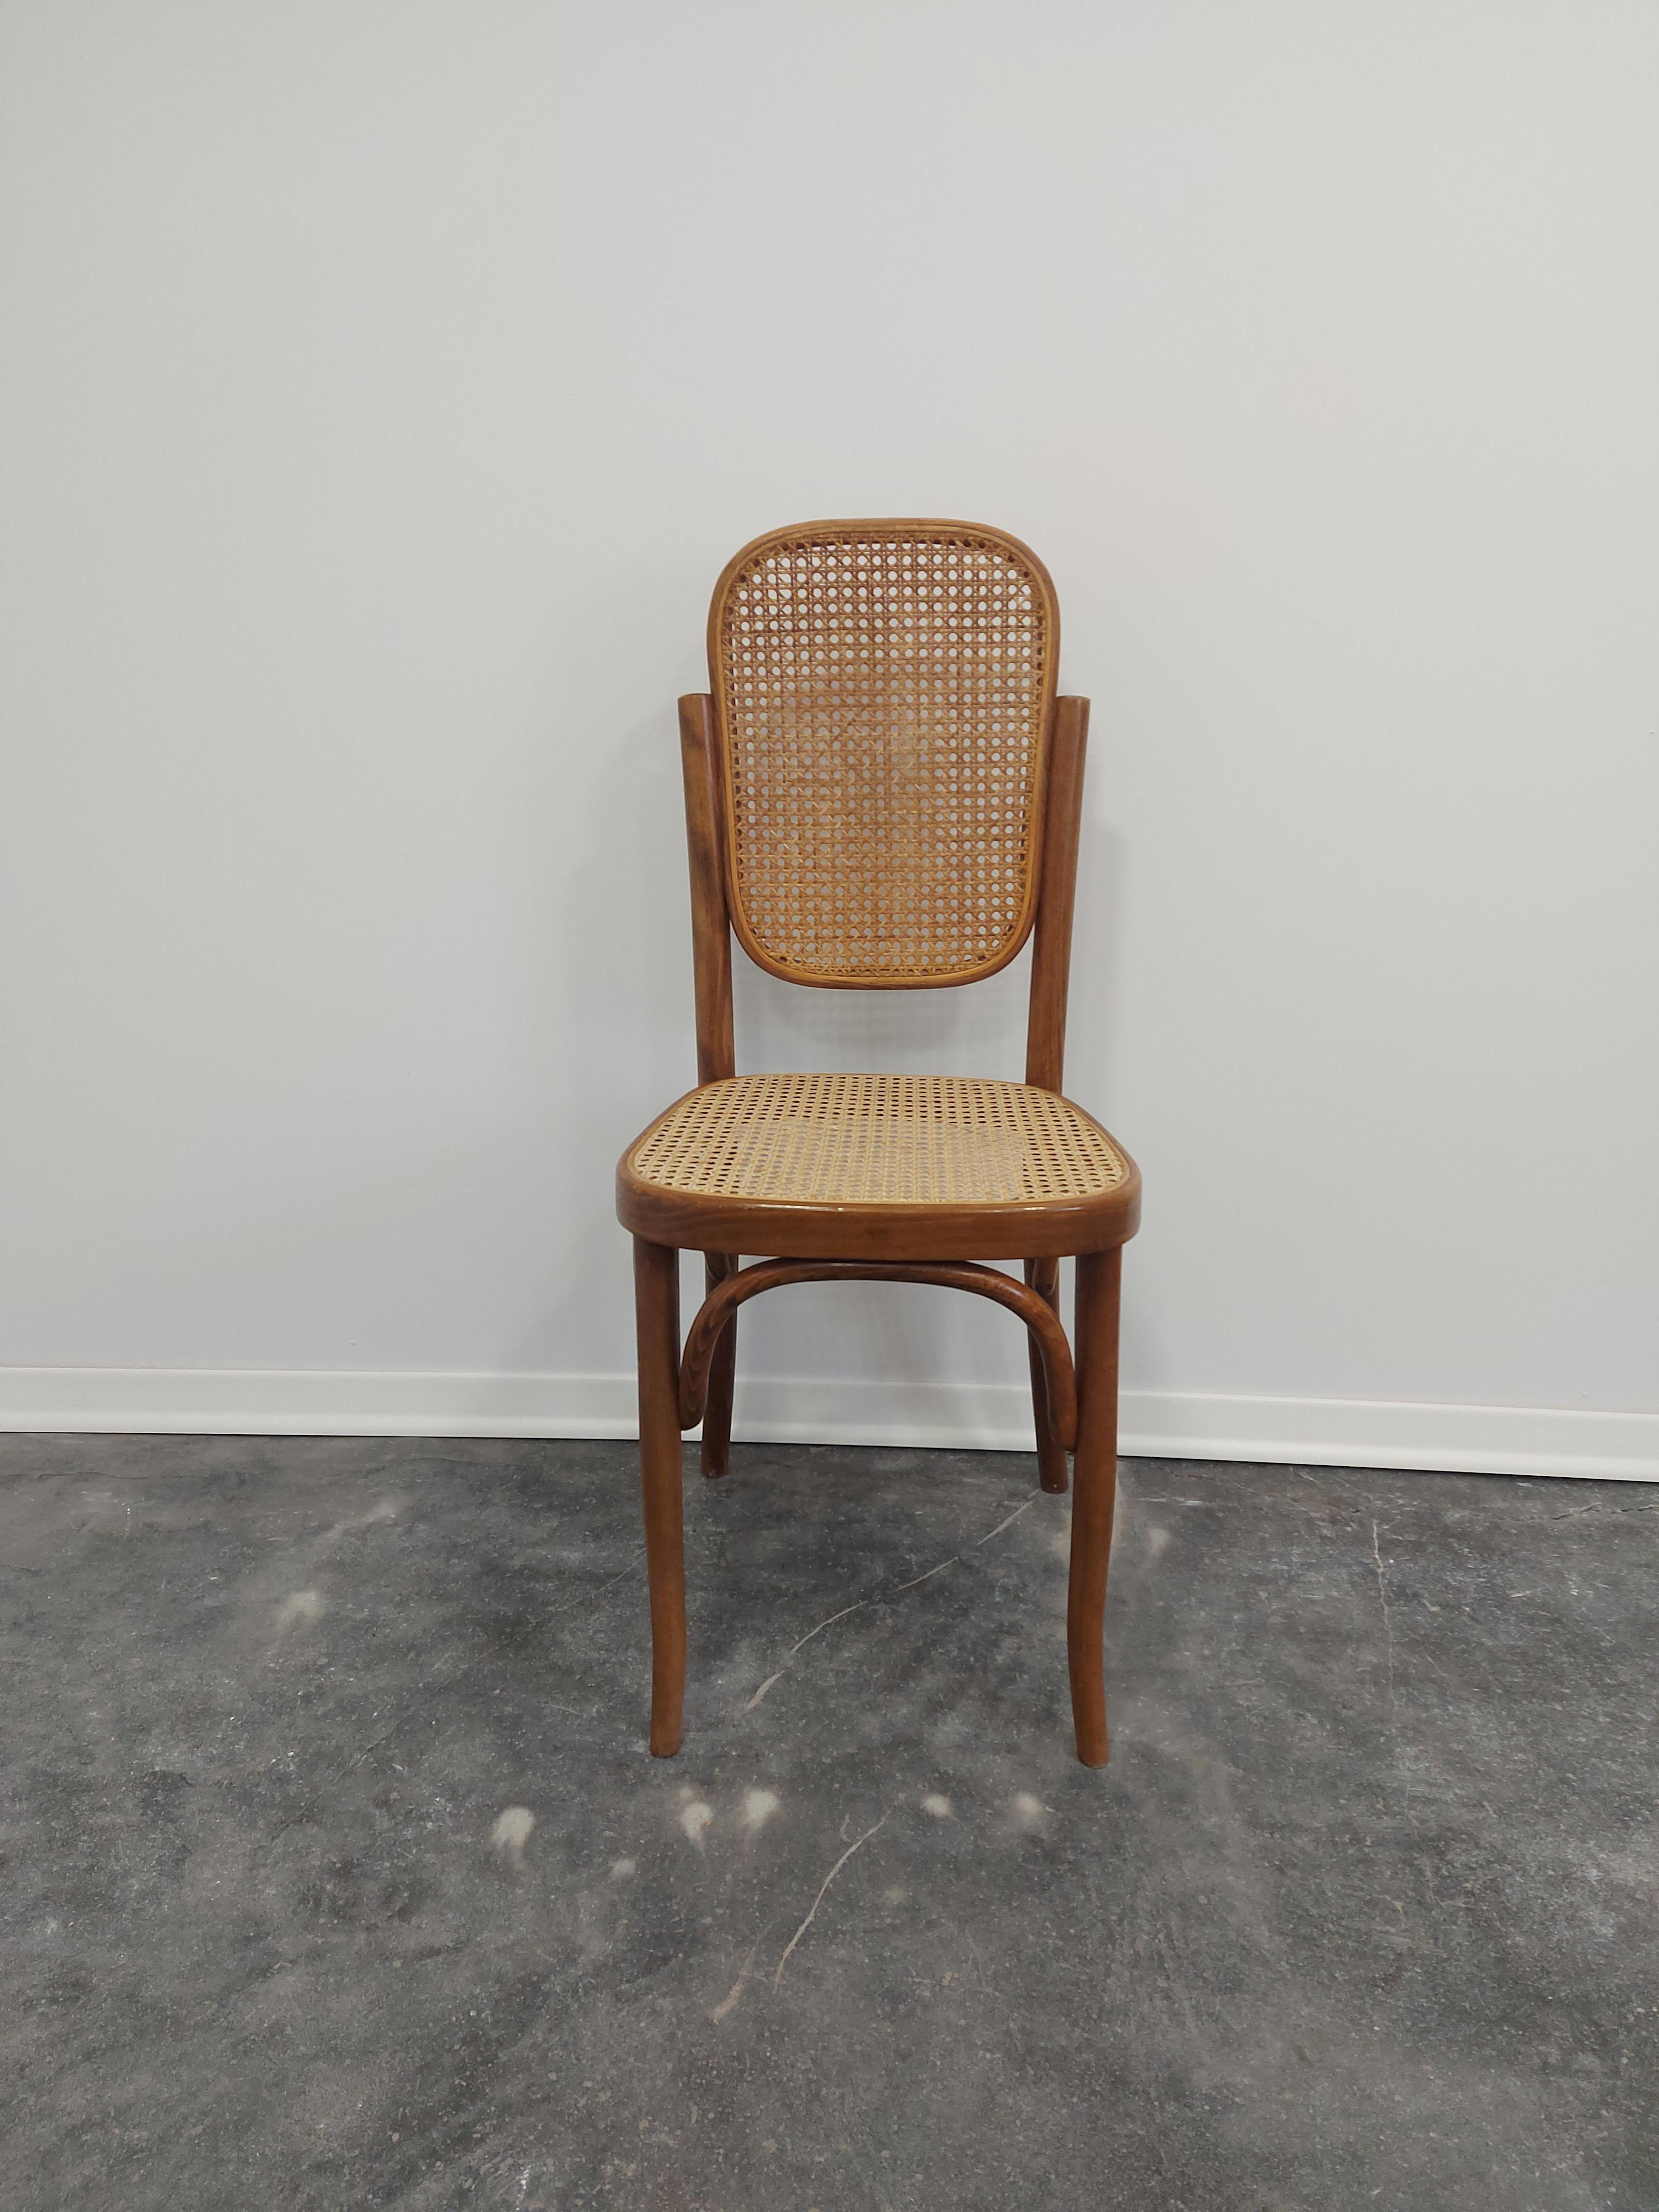 Bentwood cane Chair in vintage condition (well preserved) very rare find.

Production period: 1960s.

Materials: Bentwood, cane.

Condition: great, signs of use, undamaged.